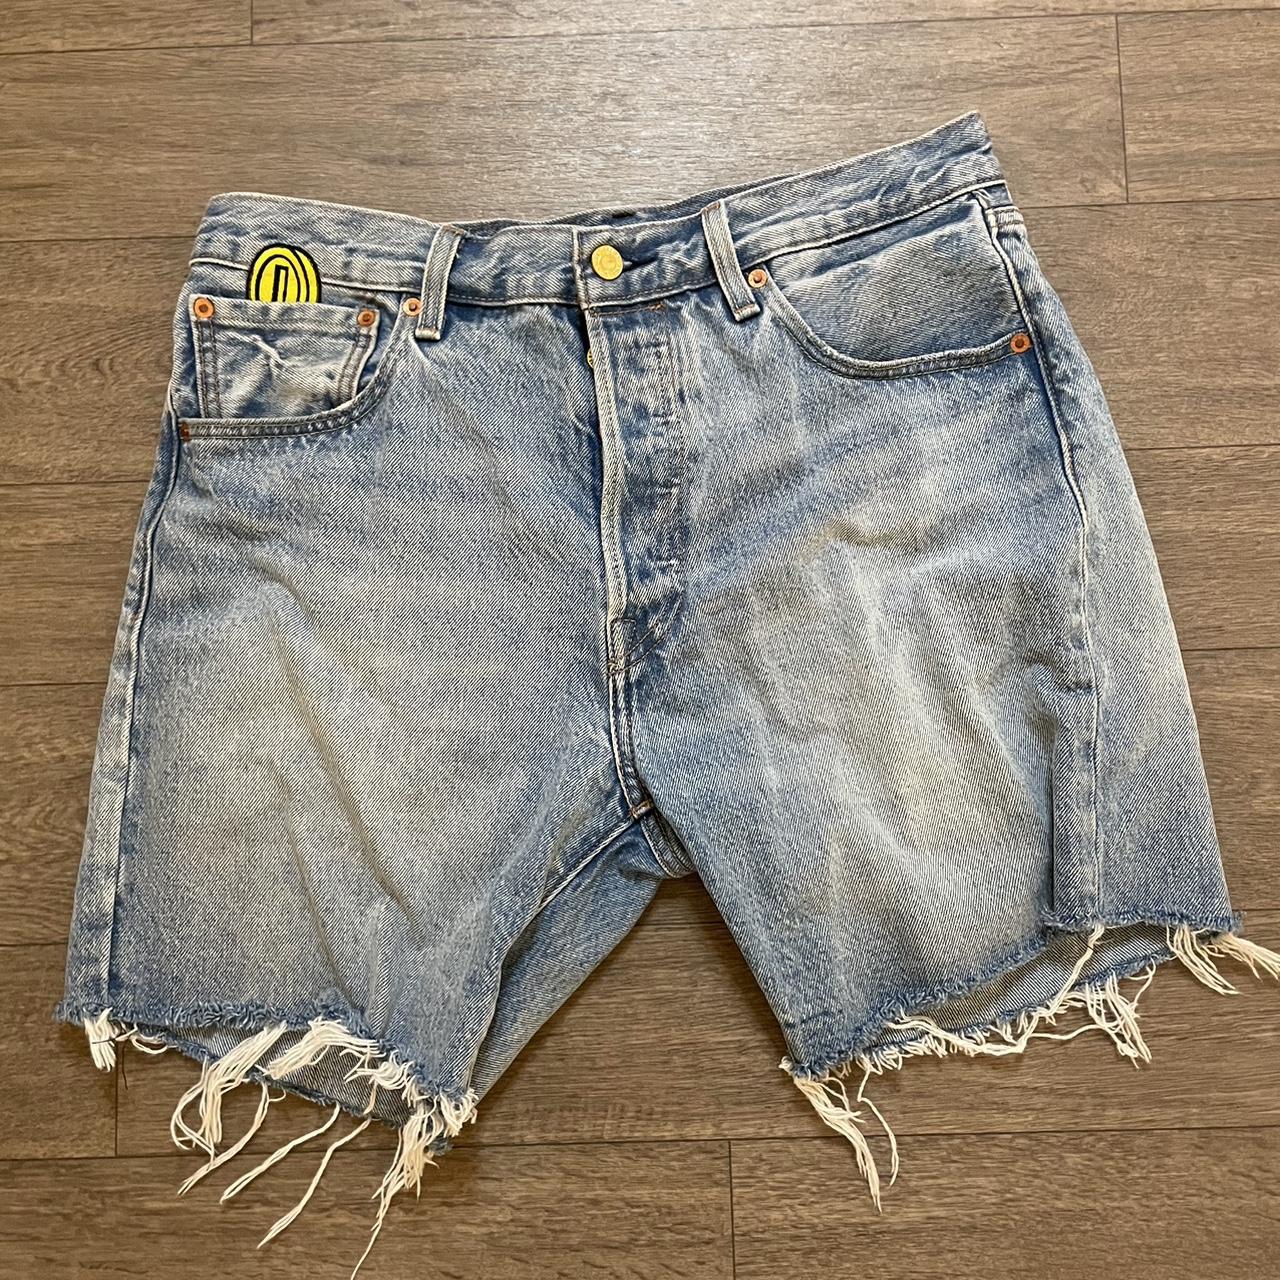 Levis x Super Mario Bro 501 ‘93 shorts size 32. From